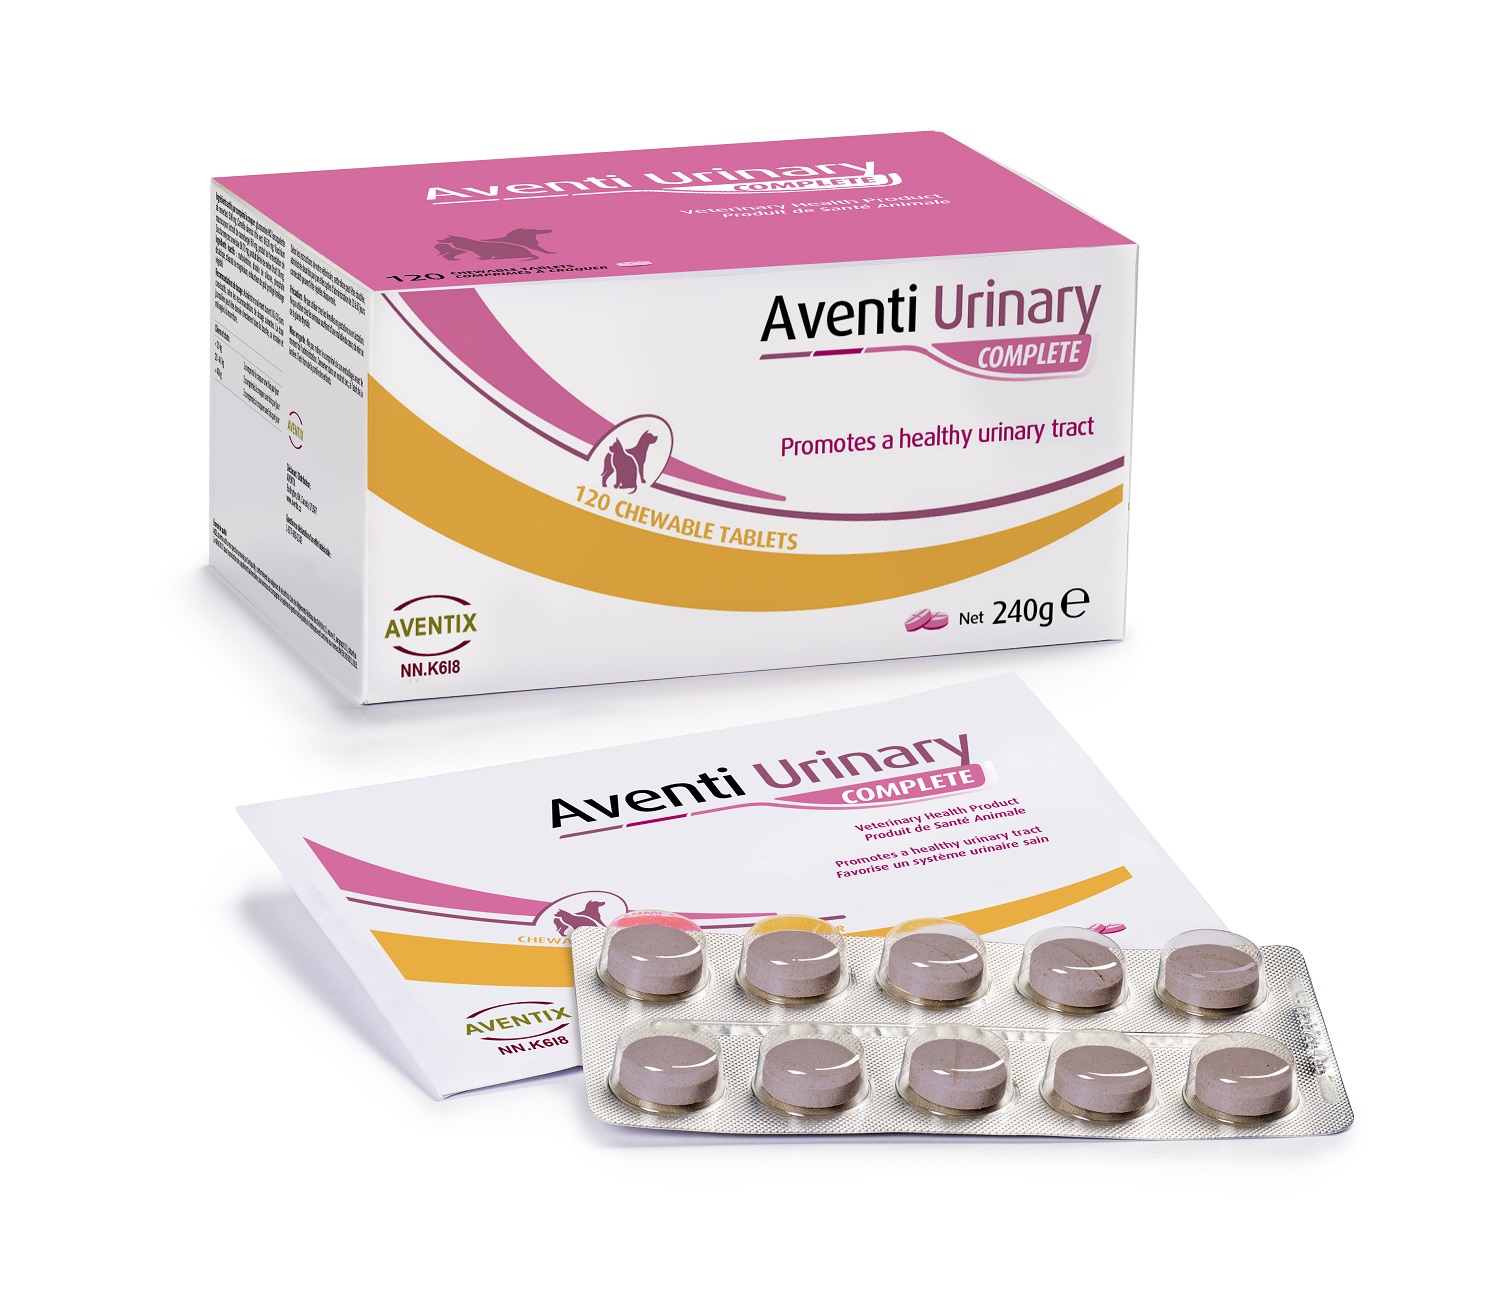 127268_Cats_Aventi Urinary Complete_120 Tablets